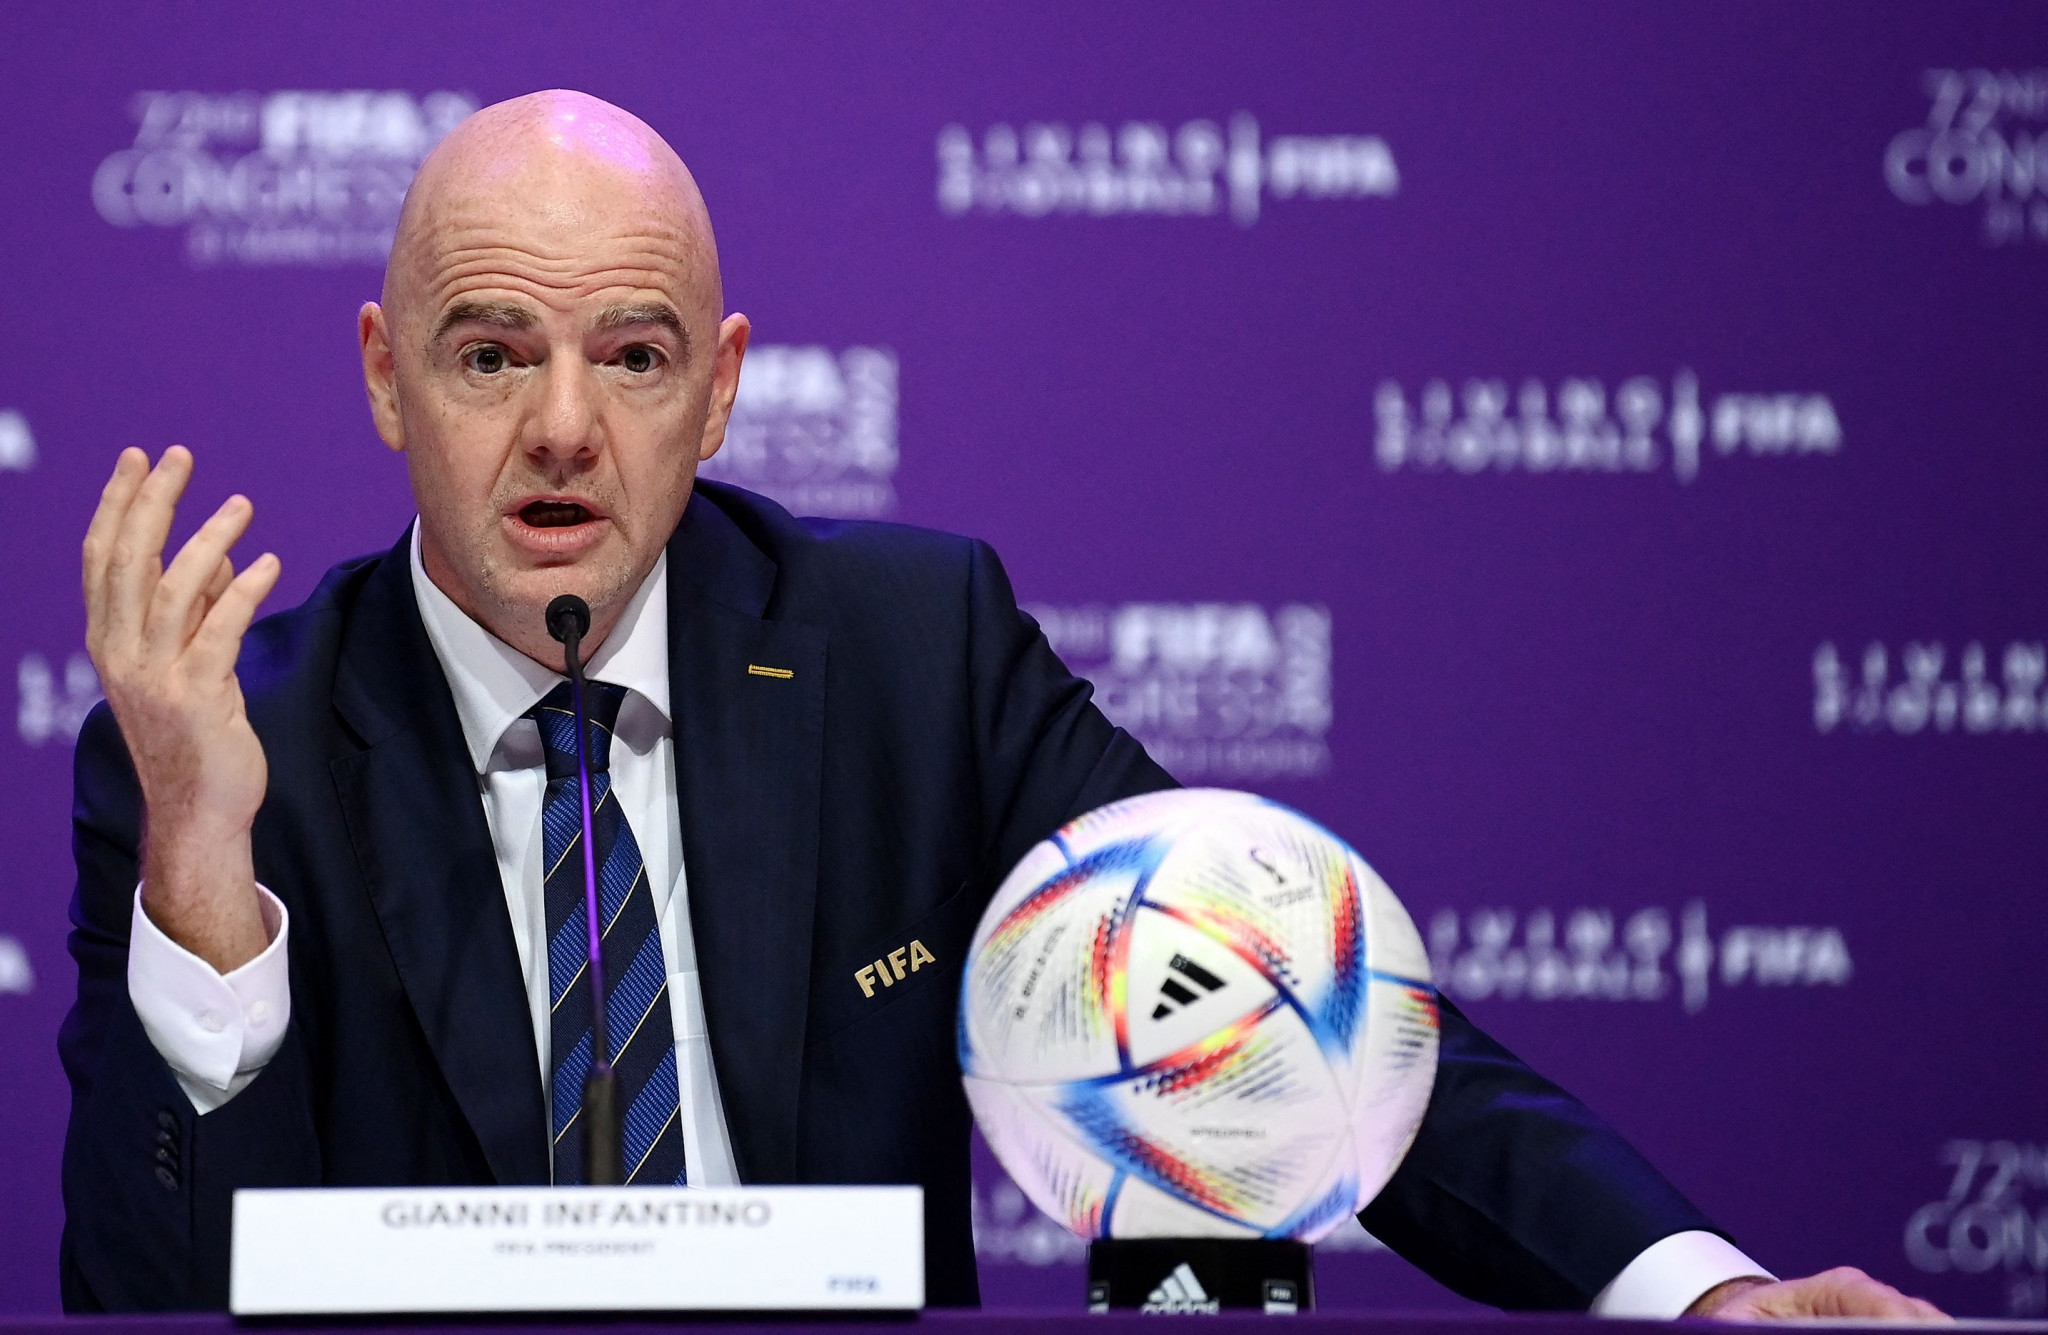 Gianni Infantino said at a press conference 